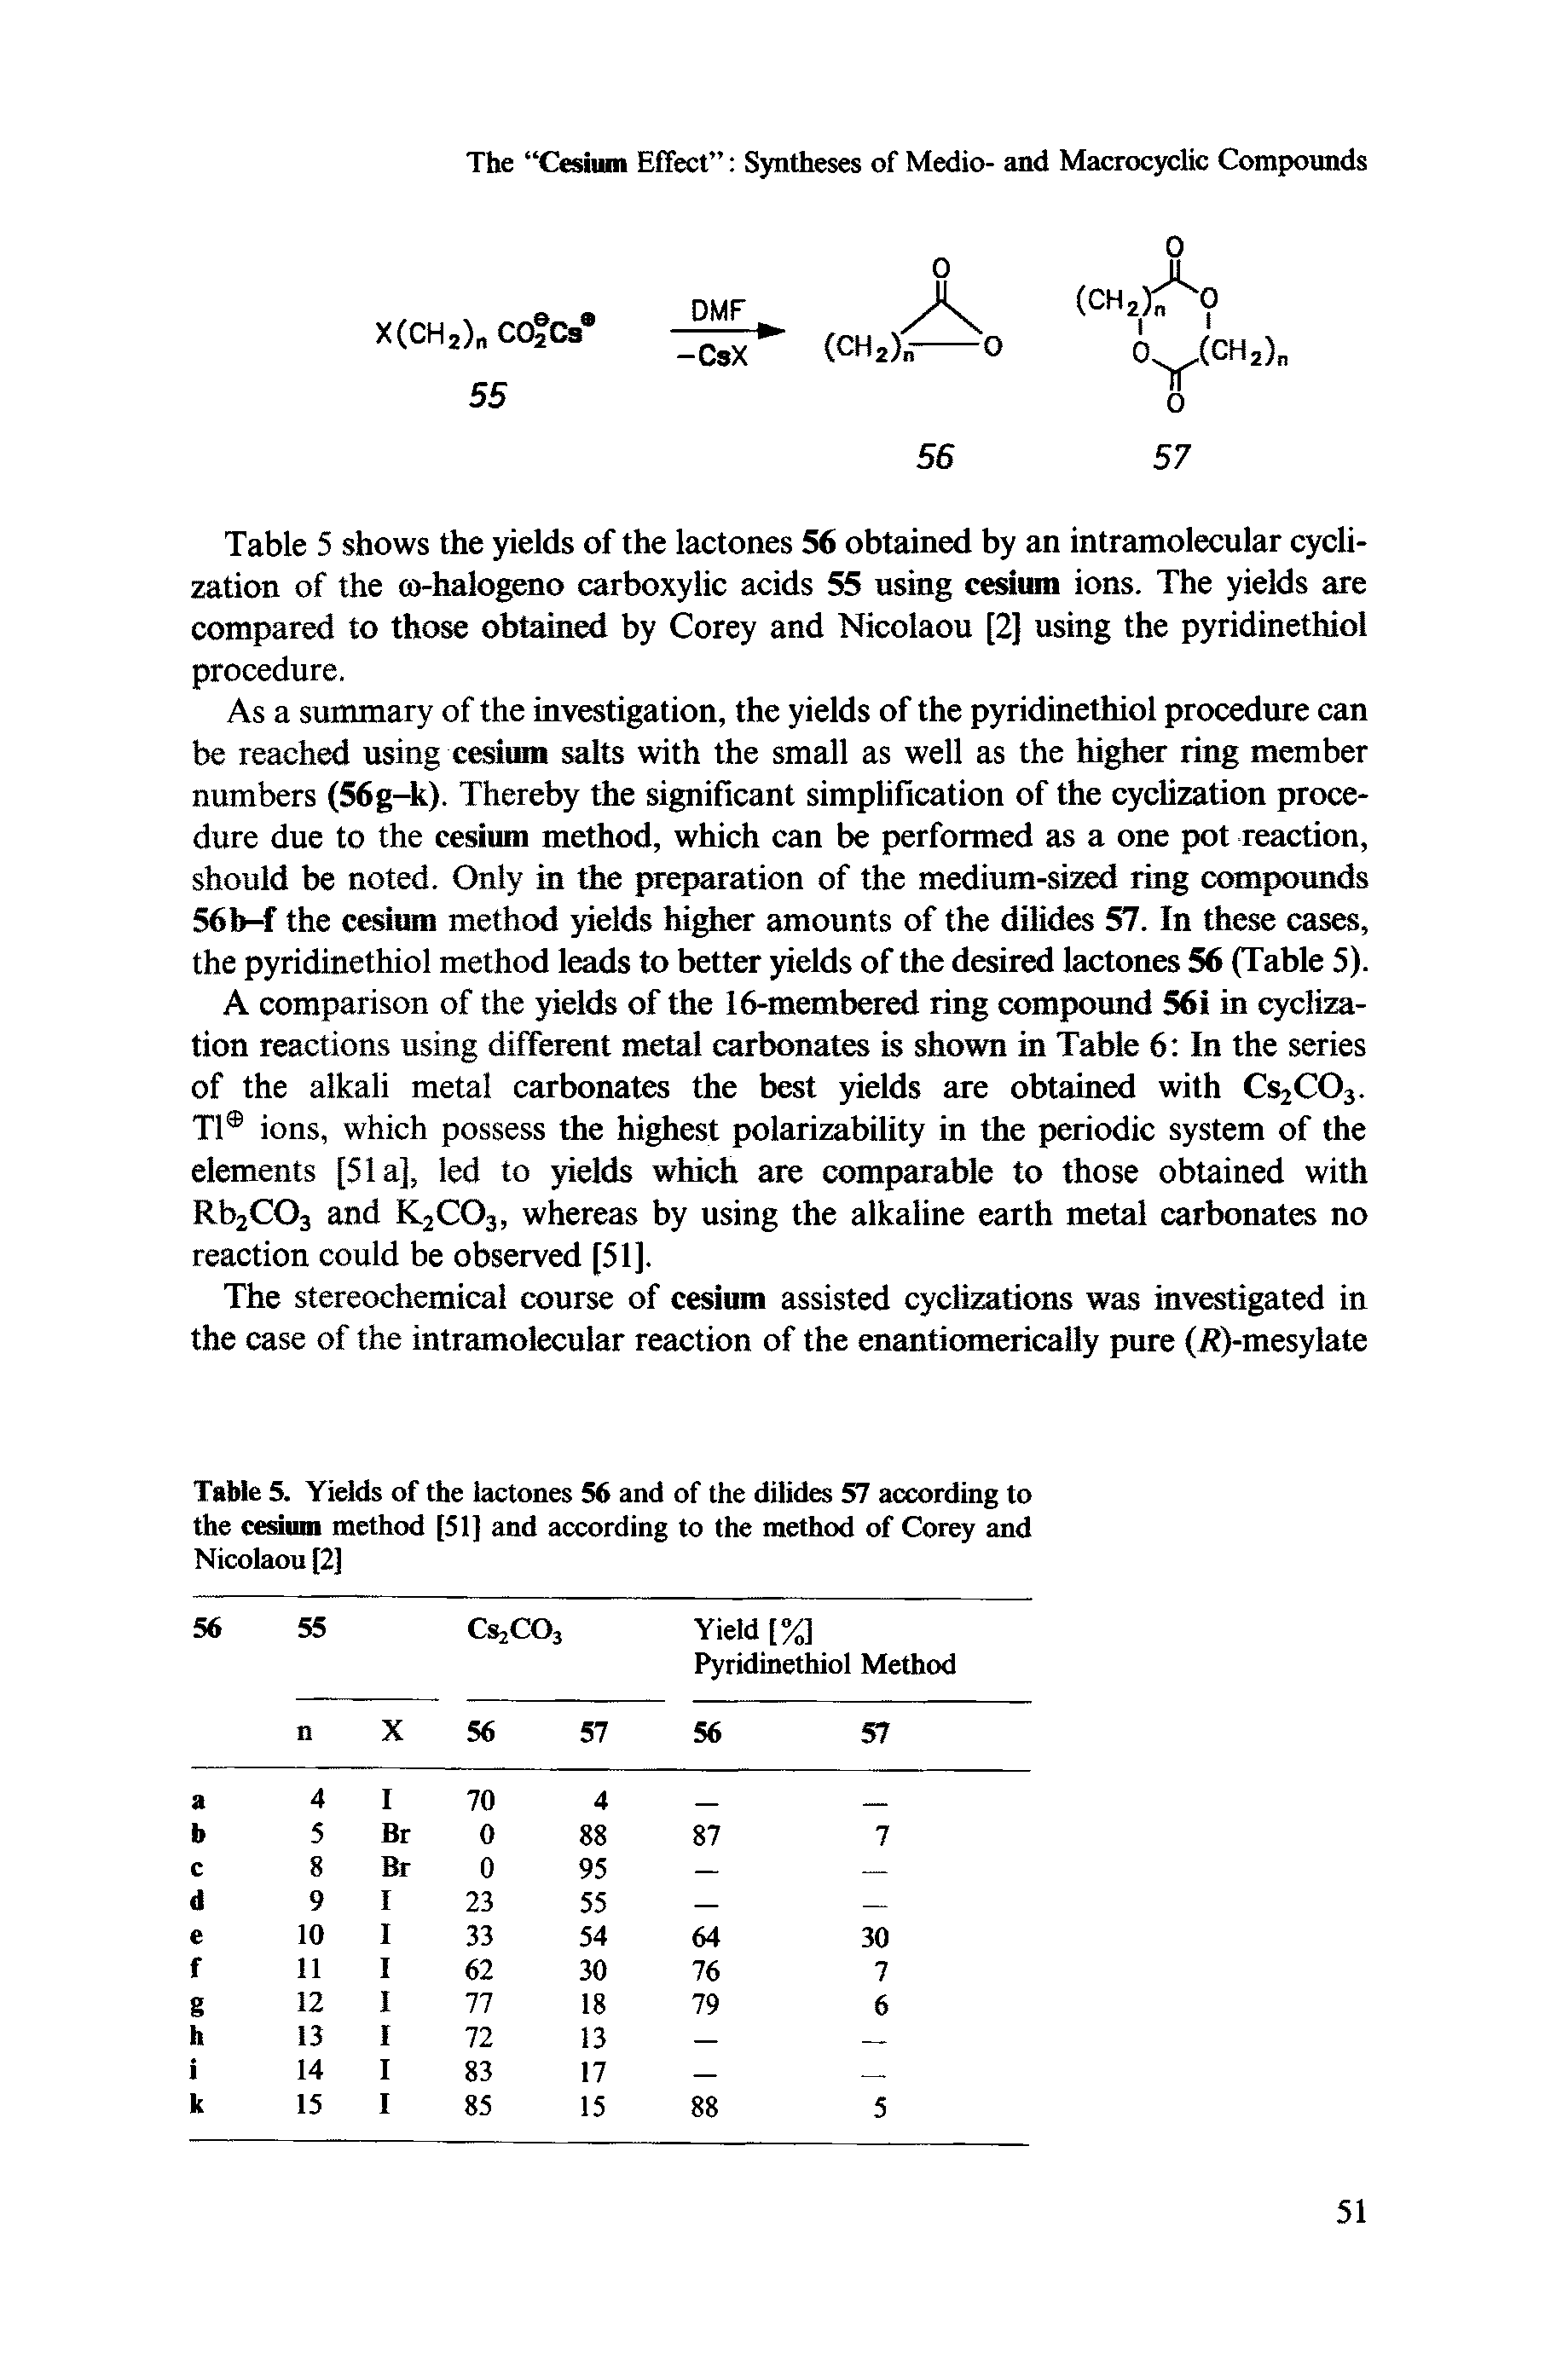 Table 5. Yields of the lactones 56 and of the dilides 57 according to the cesium method [51] and according to the method of Corey and Nicolaou [2]...